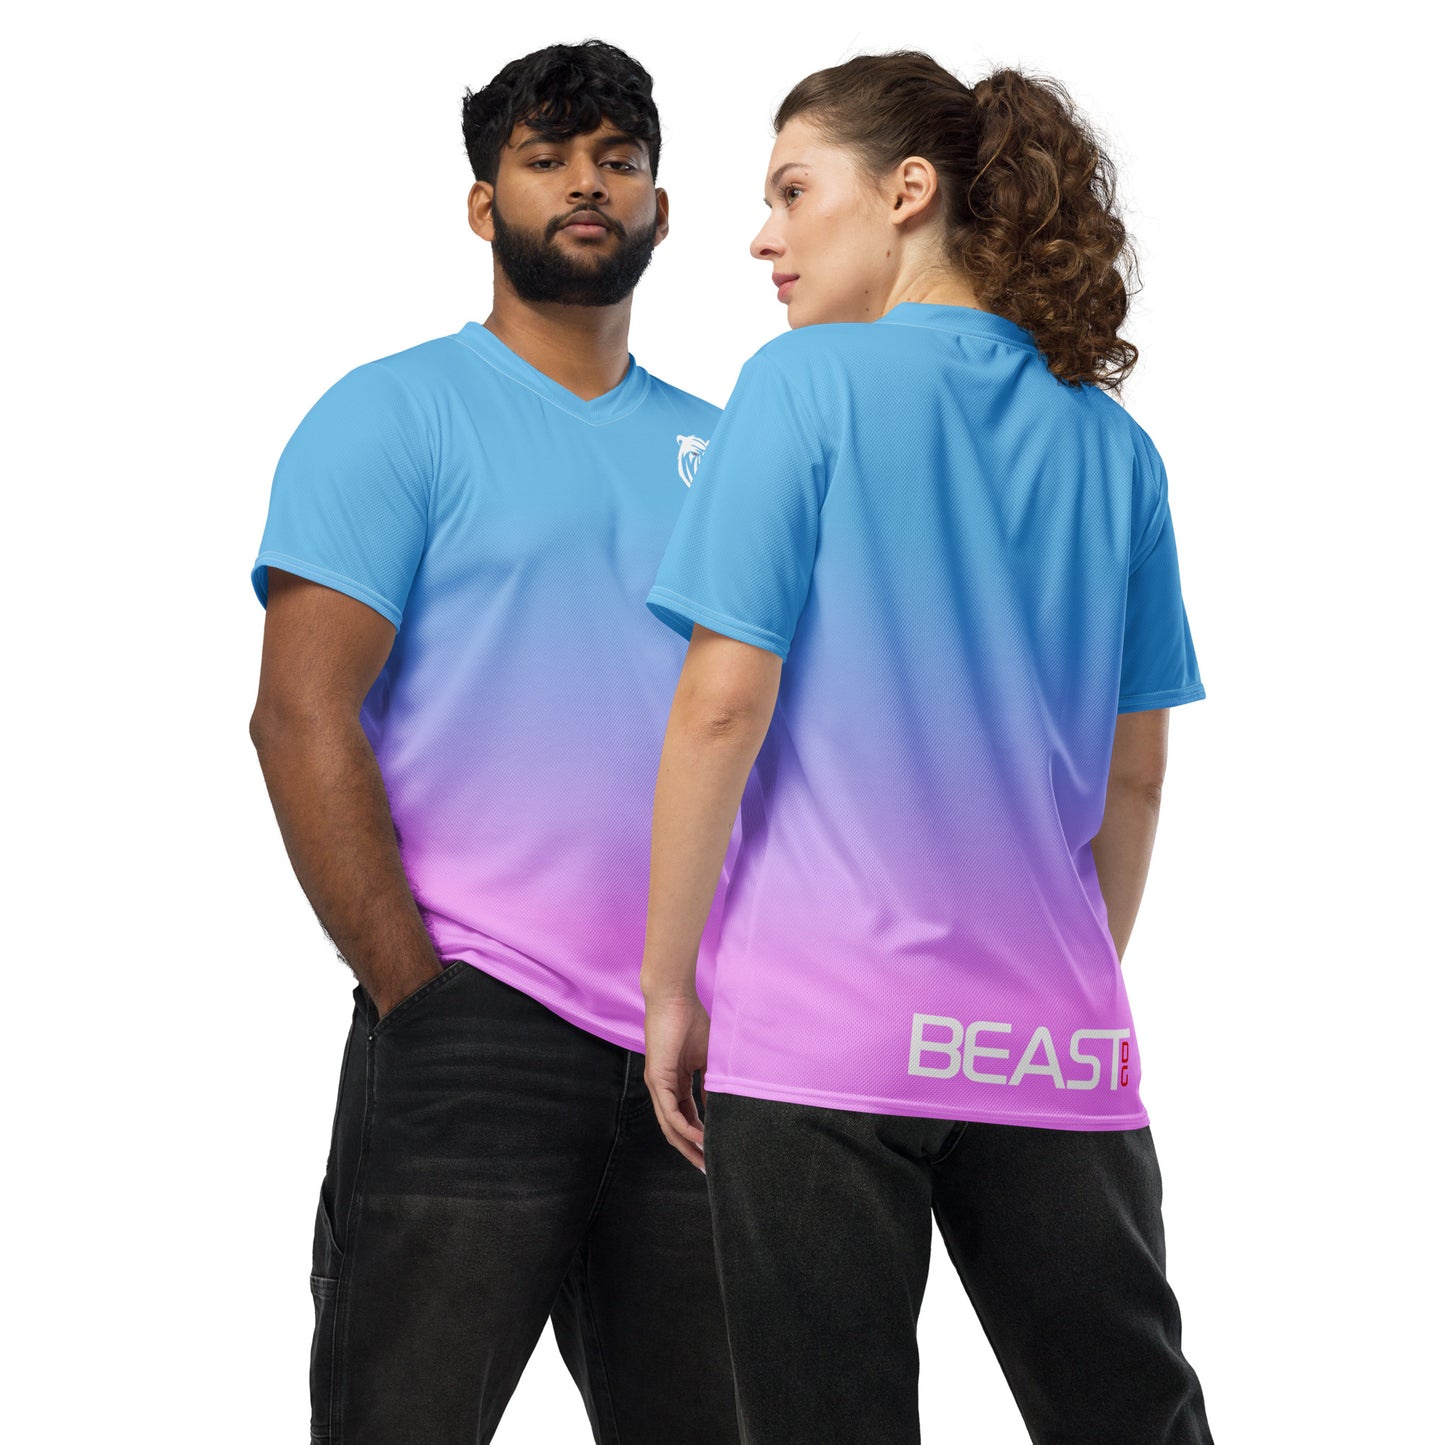 Recycled Unisex Jersey - Cotton Candy